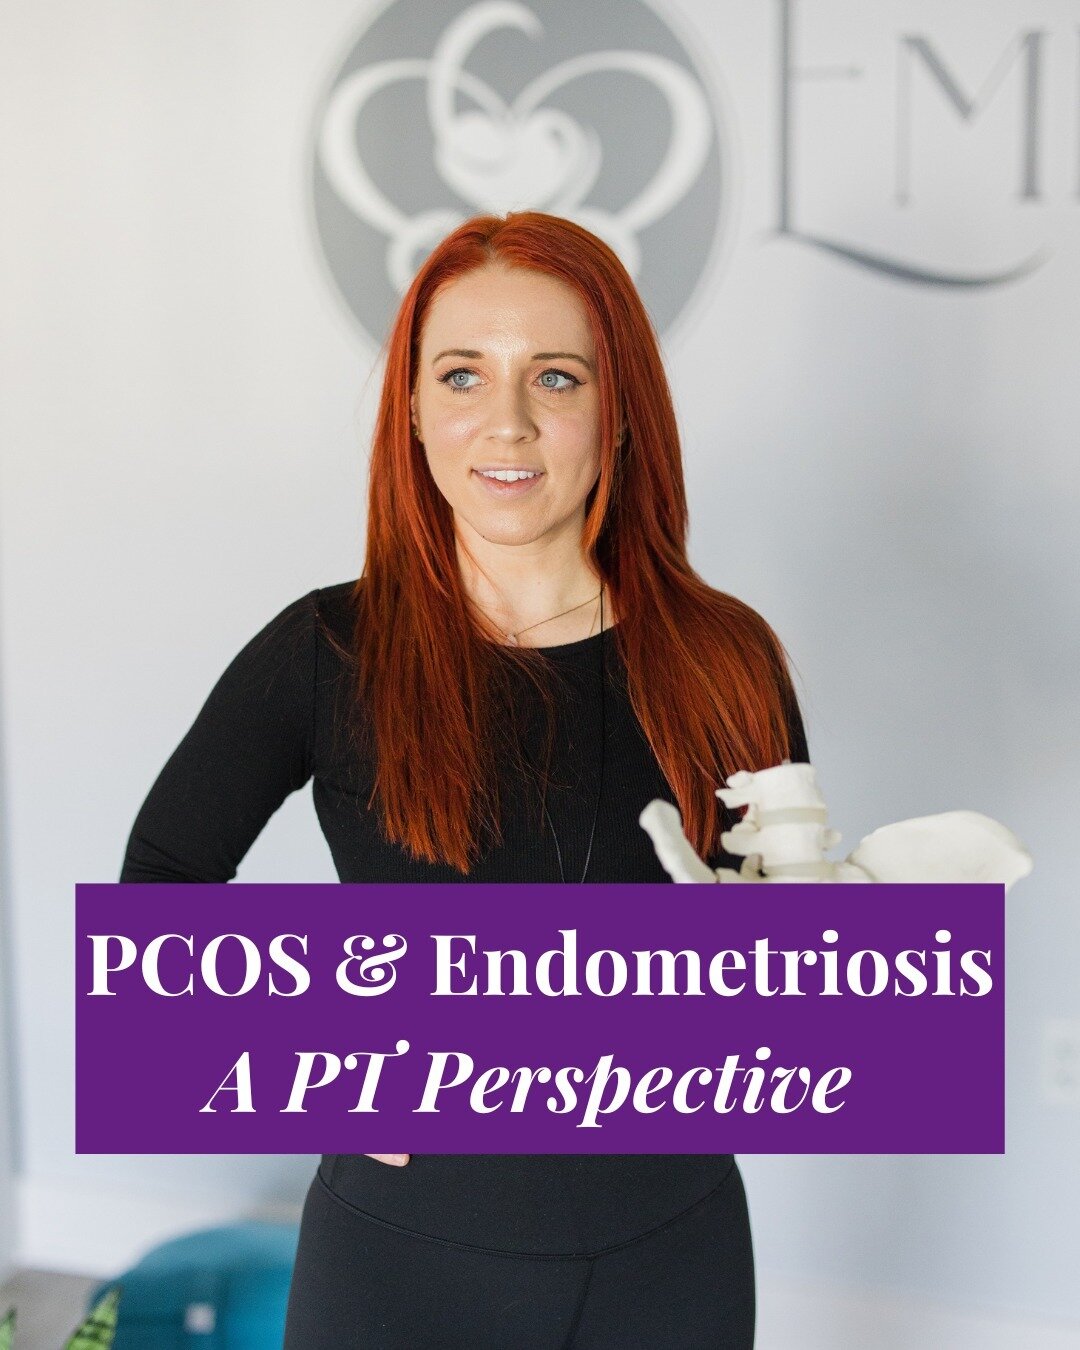 PCOS &amp; Endometriosis are two diagnoses that get both a lot and almost no observation in the women's health world.⁠
⁠
The dichotomy of being overly diagnosed and never properly diagnosed are what people who suffer with these conditions face.⁠
⁠
✨⁠